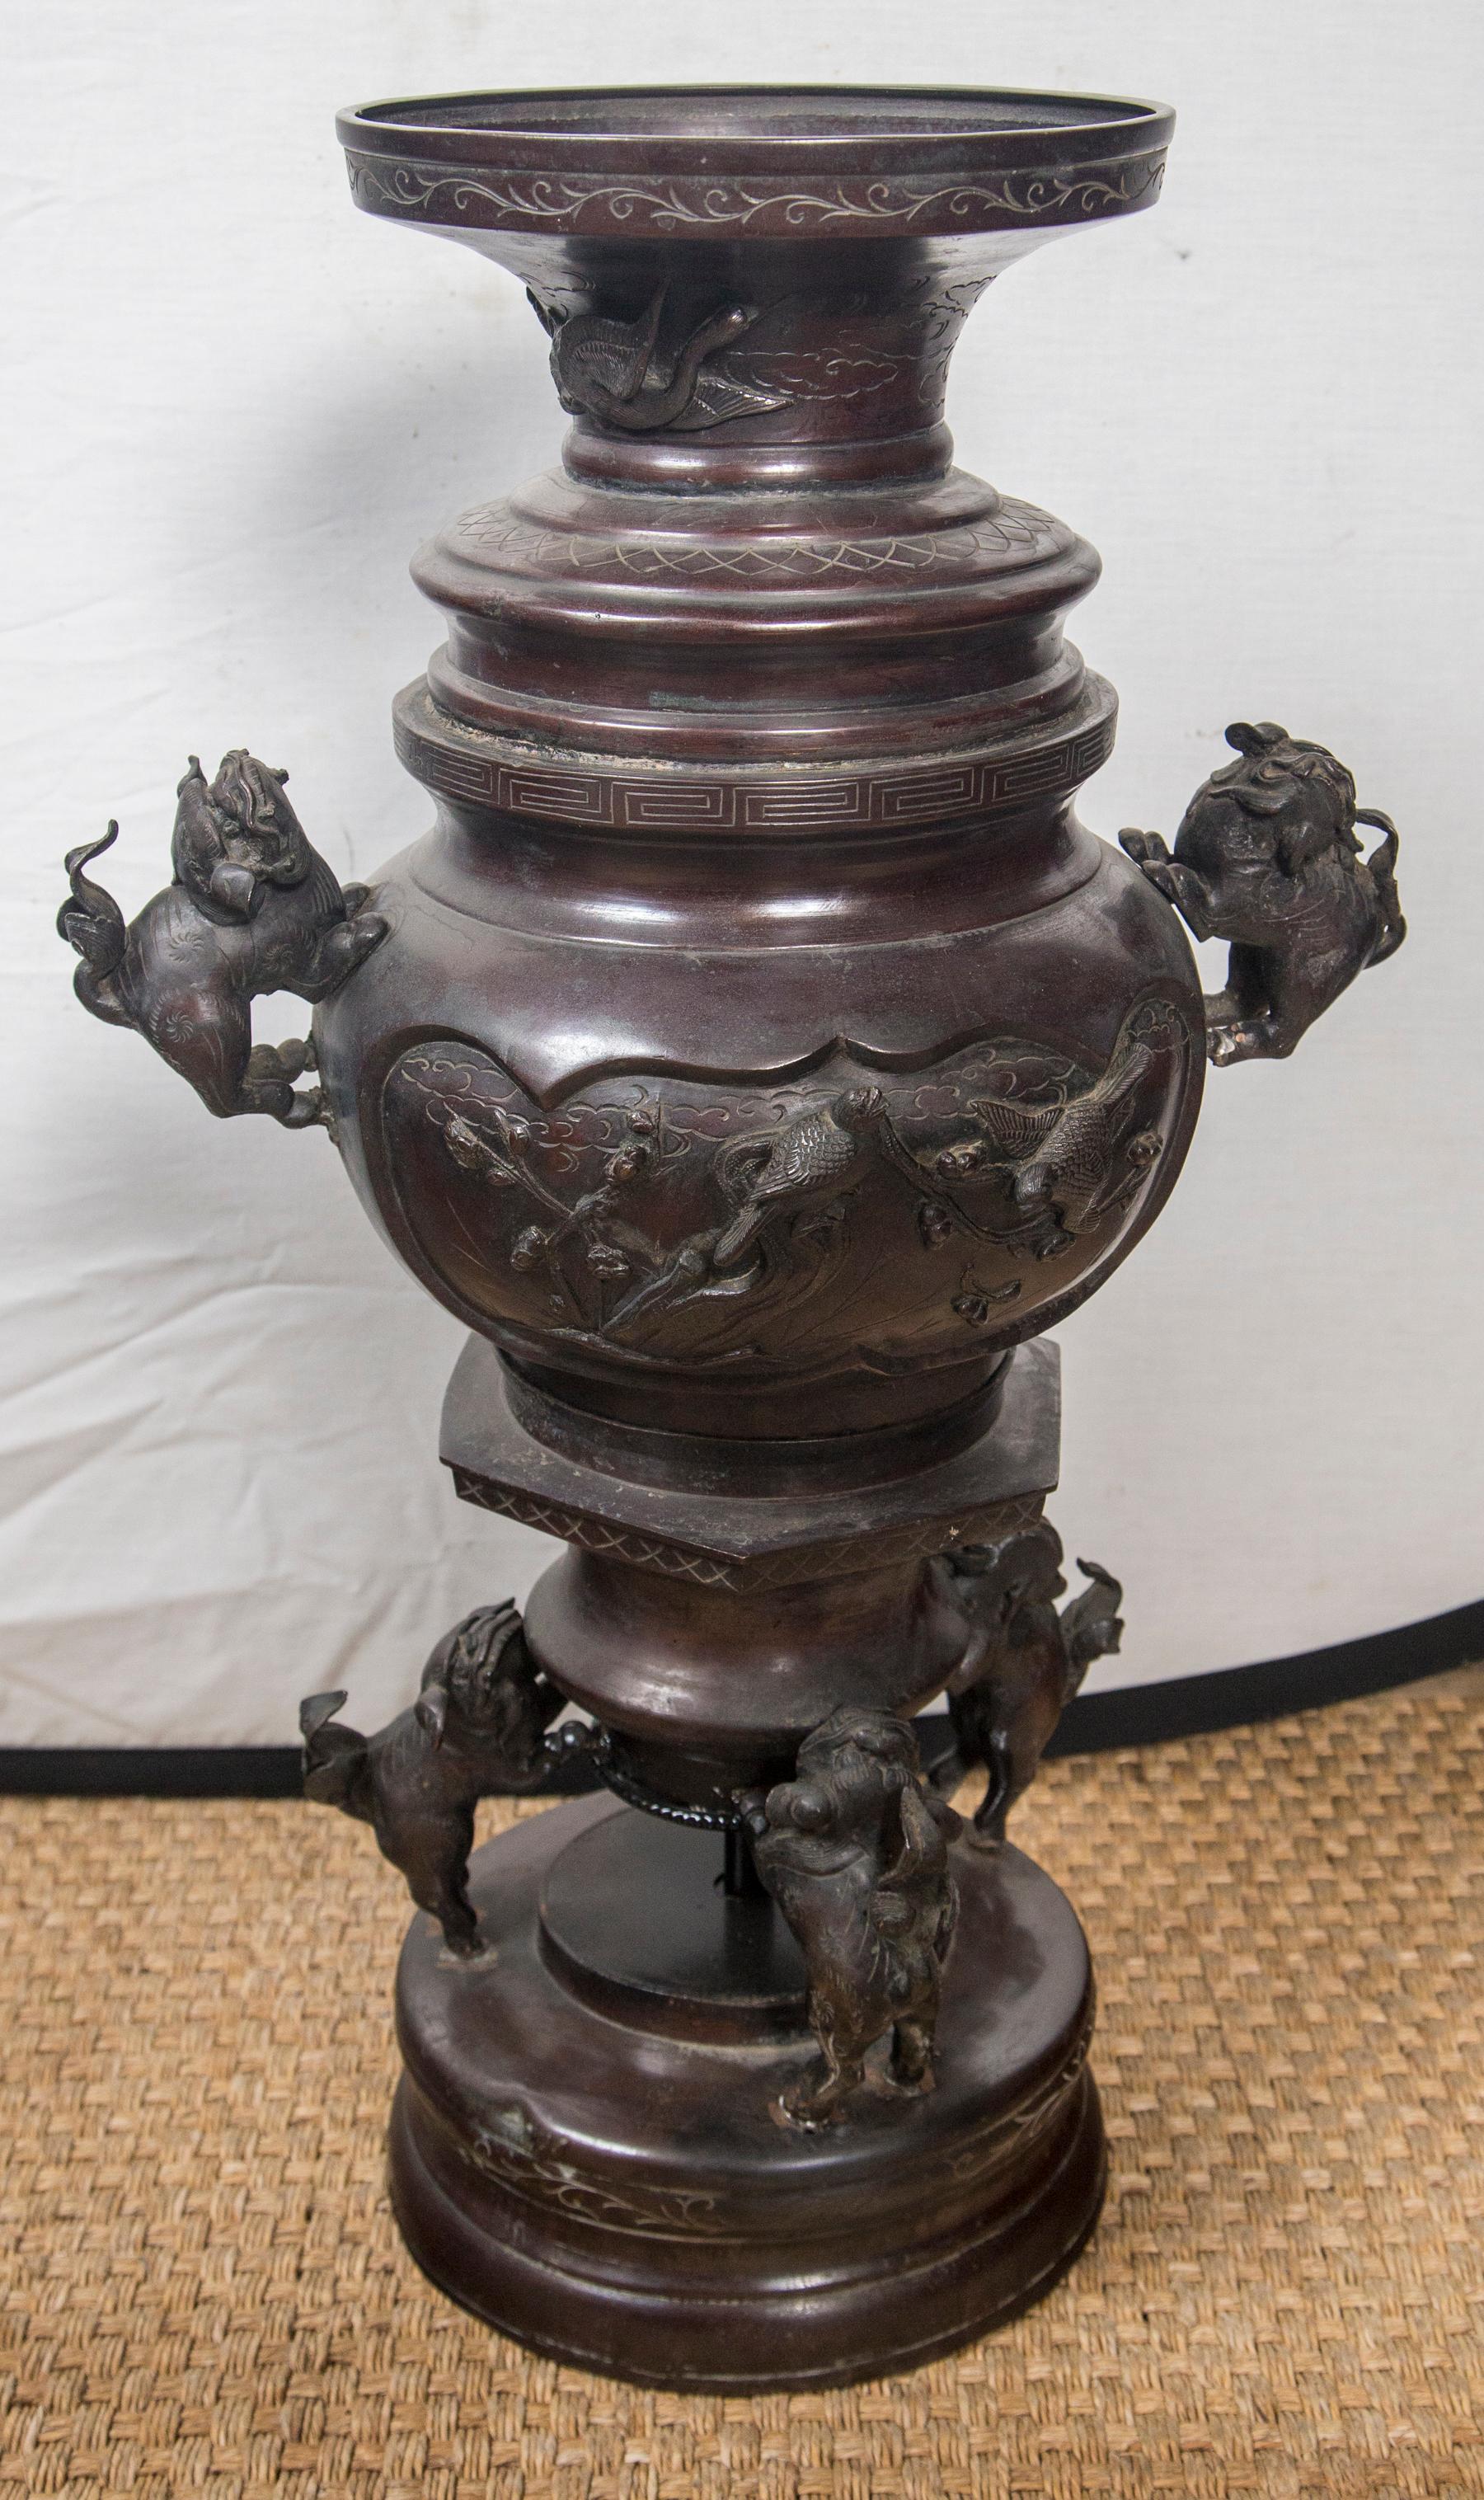 Well cast bronze vases, that have been converted to table lamps in the past. All mountings for lamps removed. Foo dog handles make the overall diameter 14.5 inches. Cartouches in relief of birds and fish (carp) and plants. Four foo dogs support the